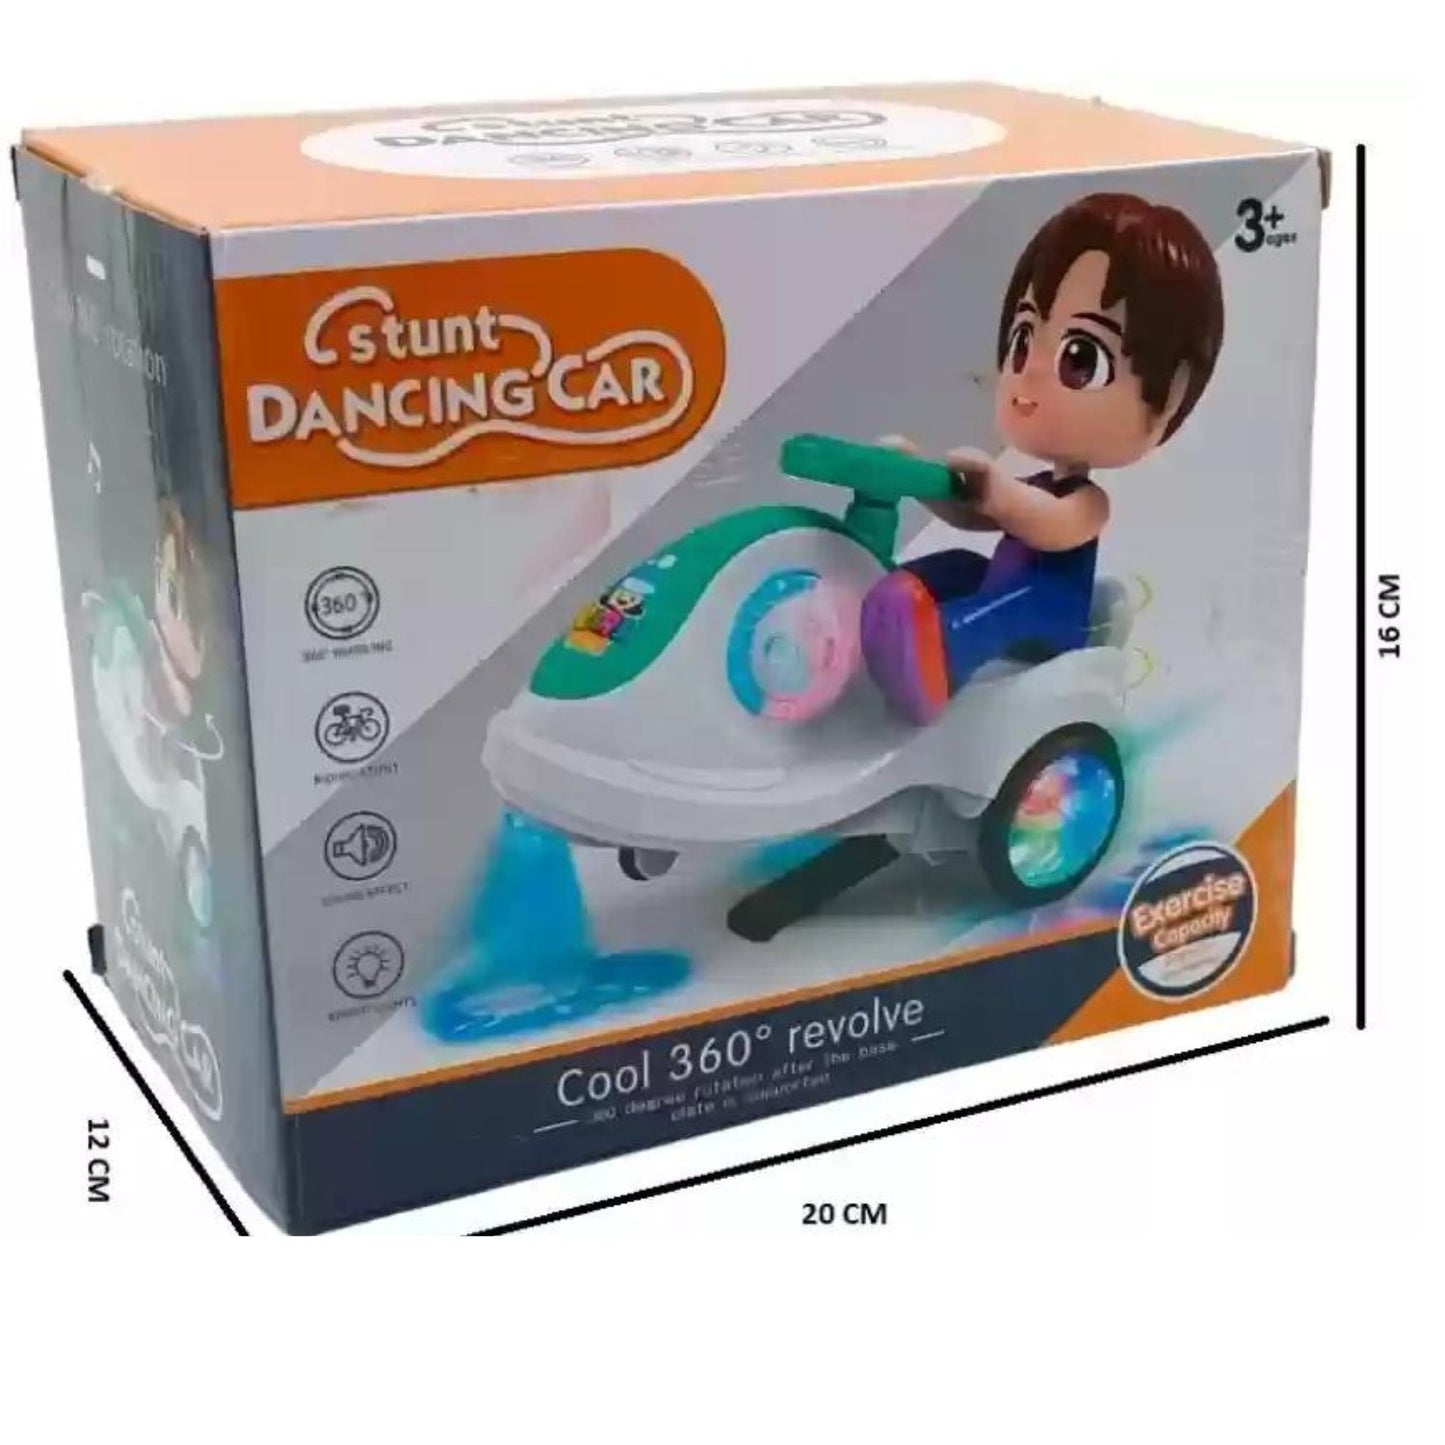 MM TOYS Stunt Dancing Car: Flashing Lights & Sound Effects, 360 Degree Rotation - Battery Operated Fun for Kids